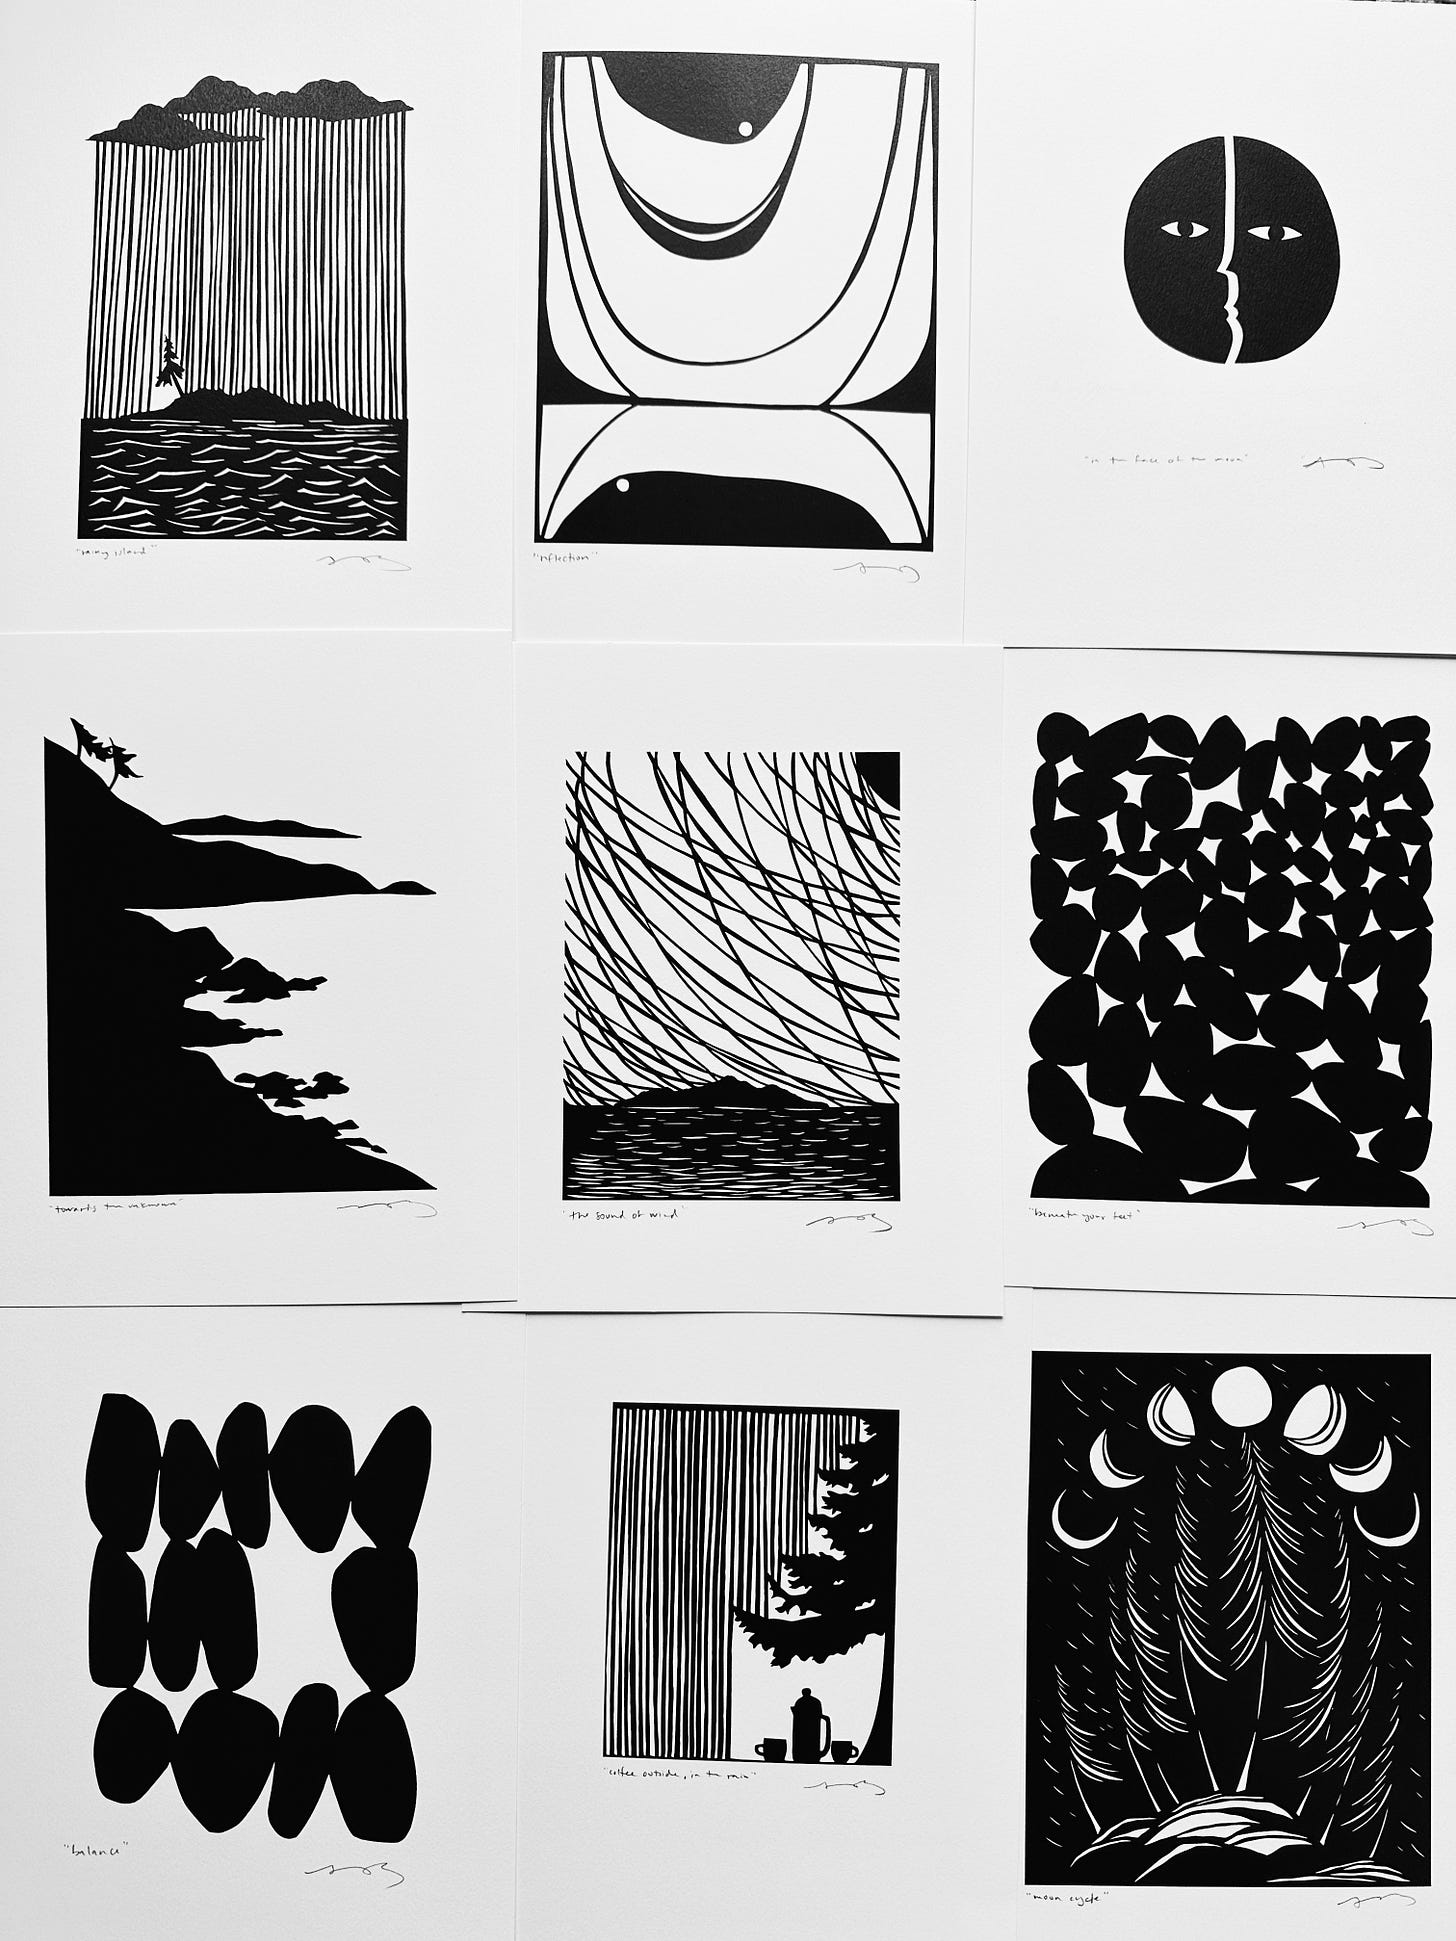 A collection of papercuts created by Anna